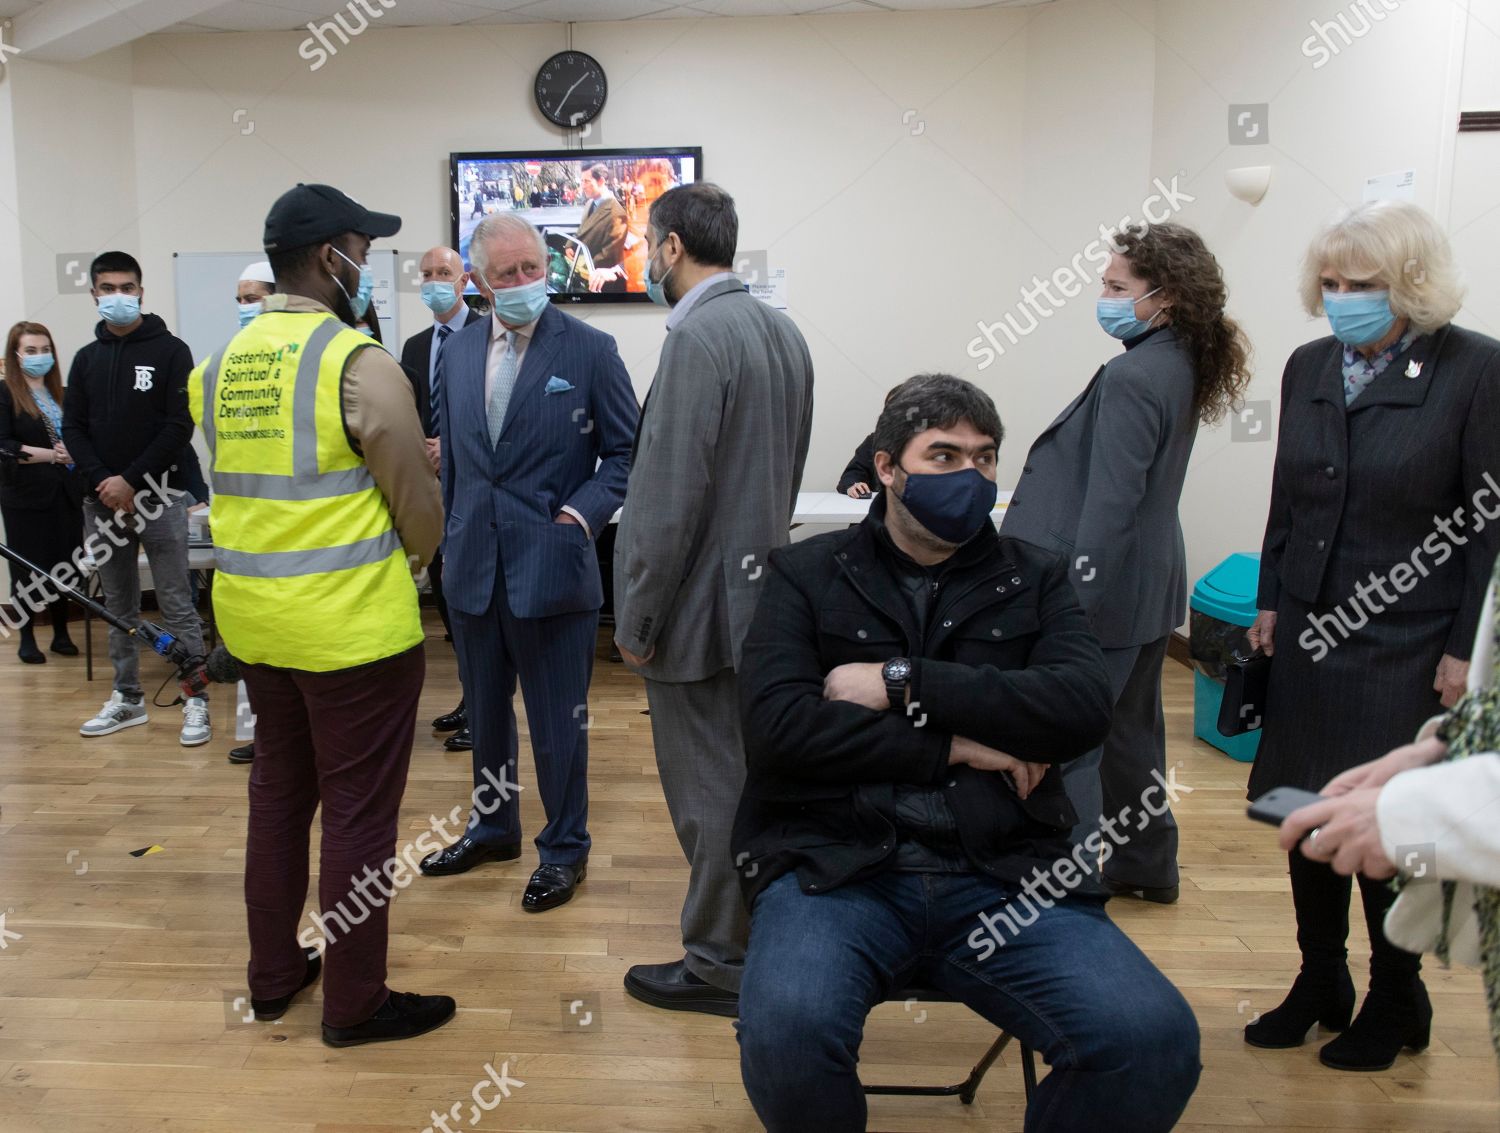 prince-charles-and-camilla-duchess-of-cornwall-visit-vaccination-pop-up-centre-at-finsbury-park-mosque-london-uk-shutterstock-editorial-11802378j.jpg